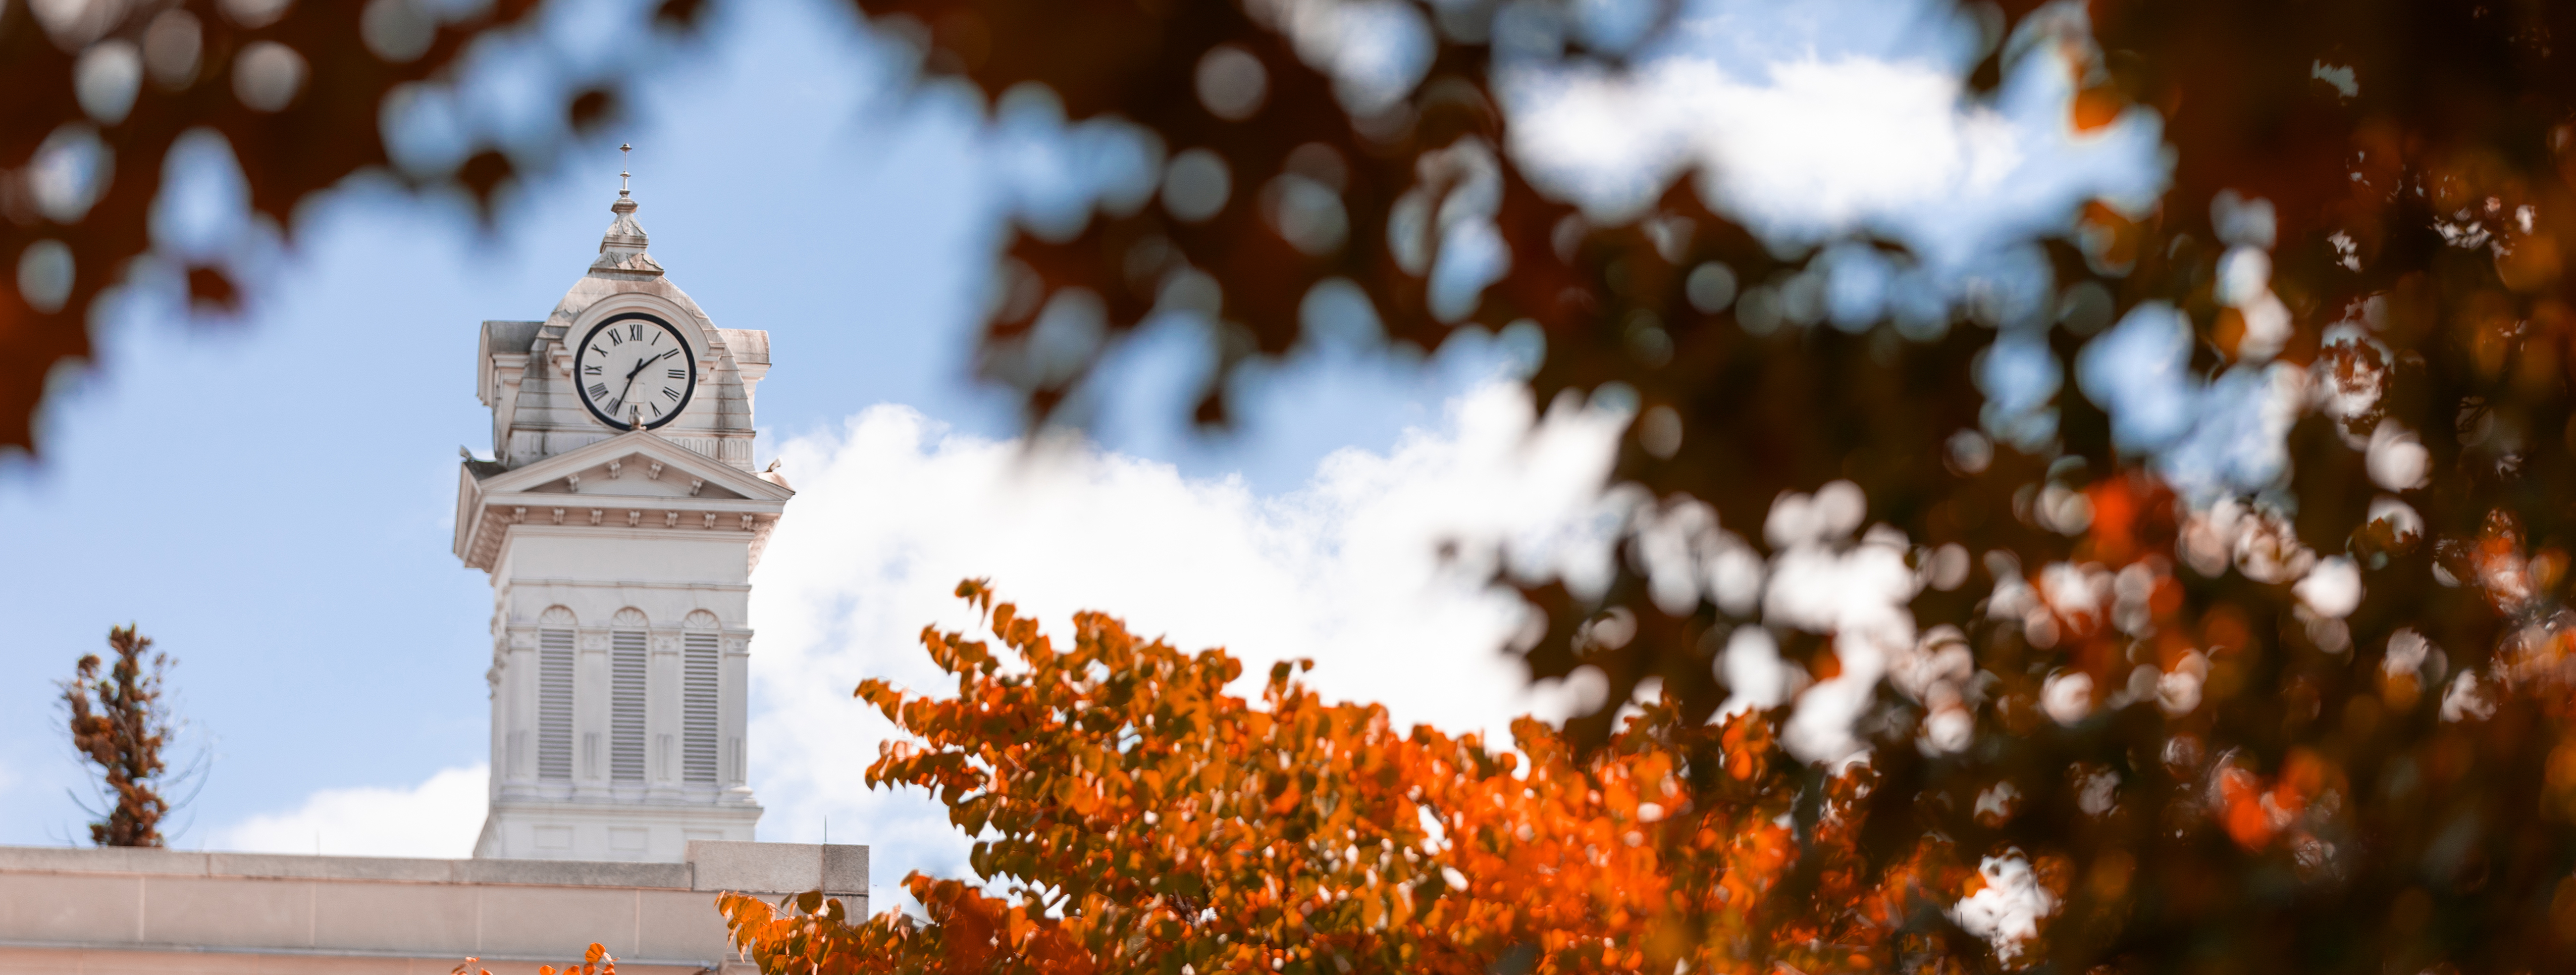 old main clock tower behind fall leaves